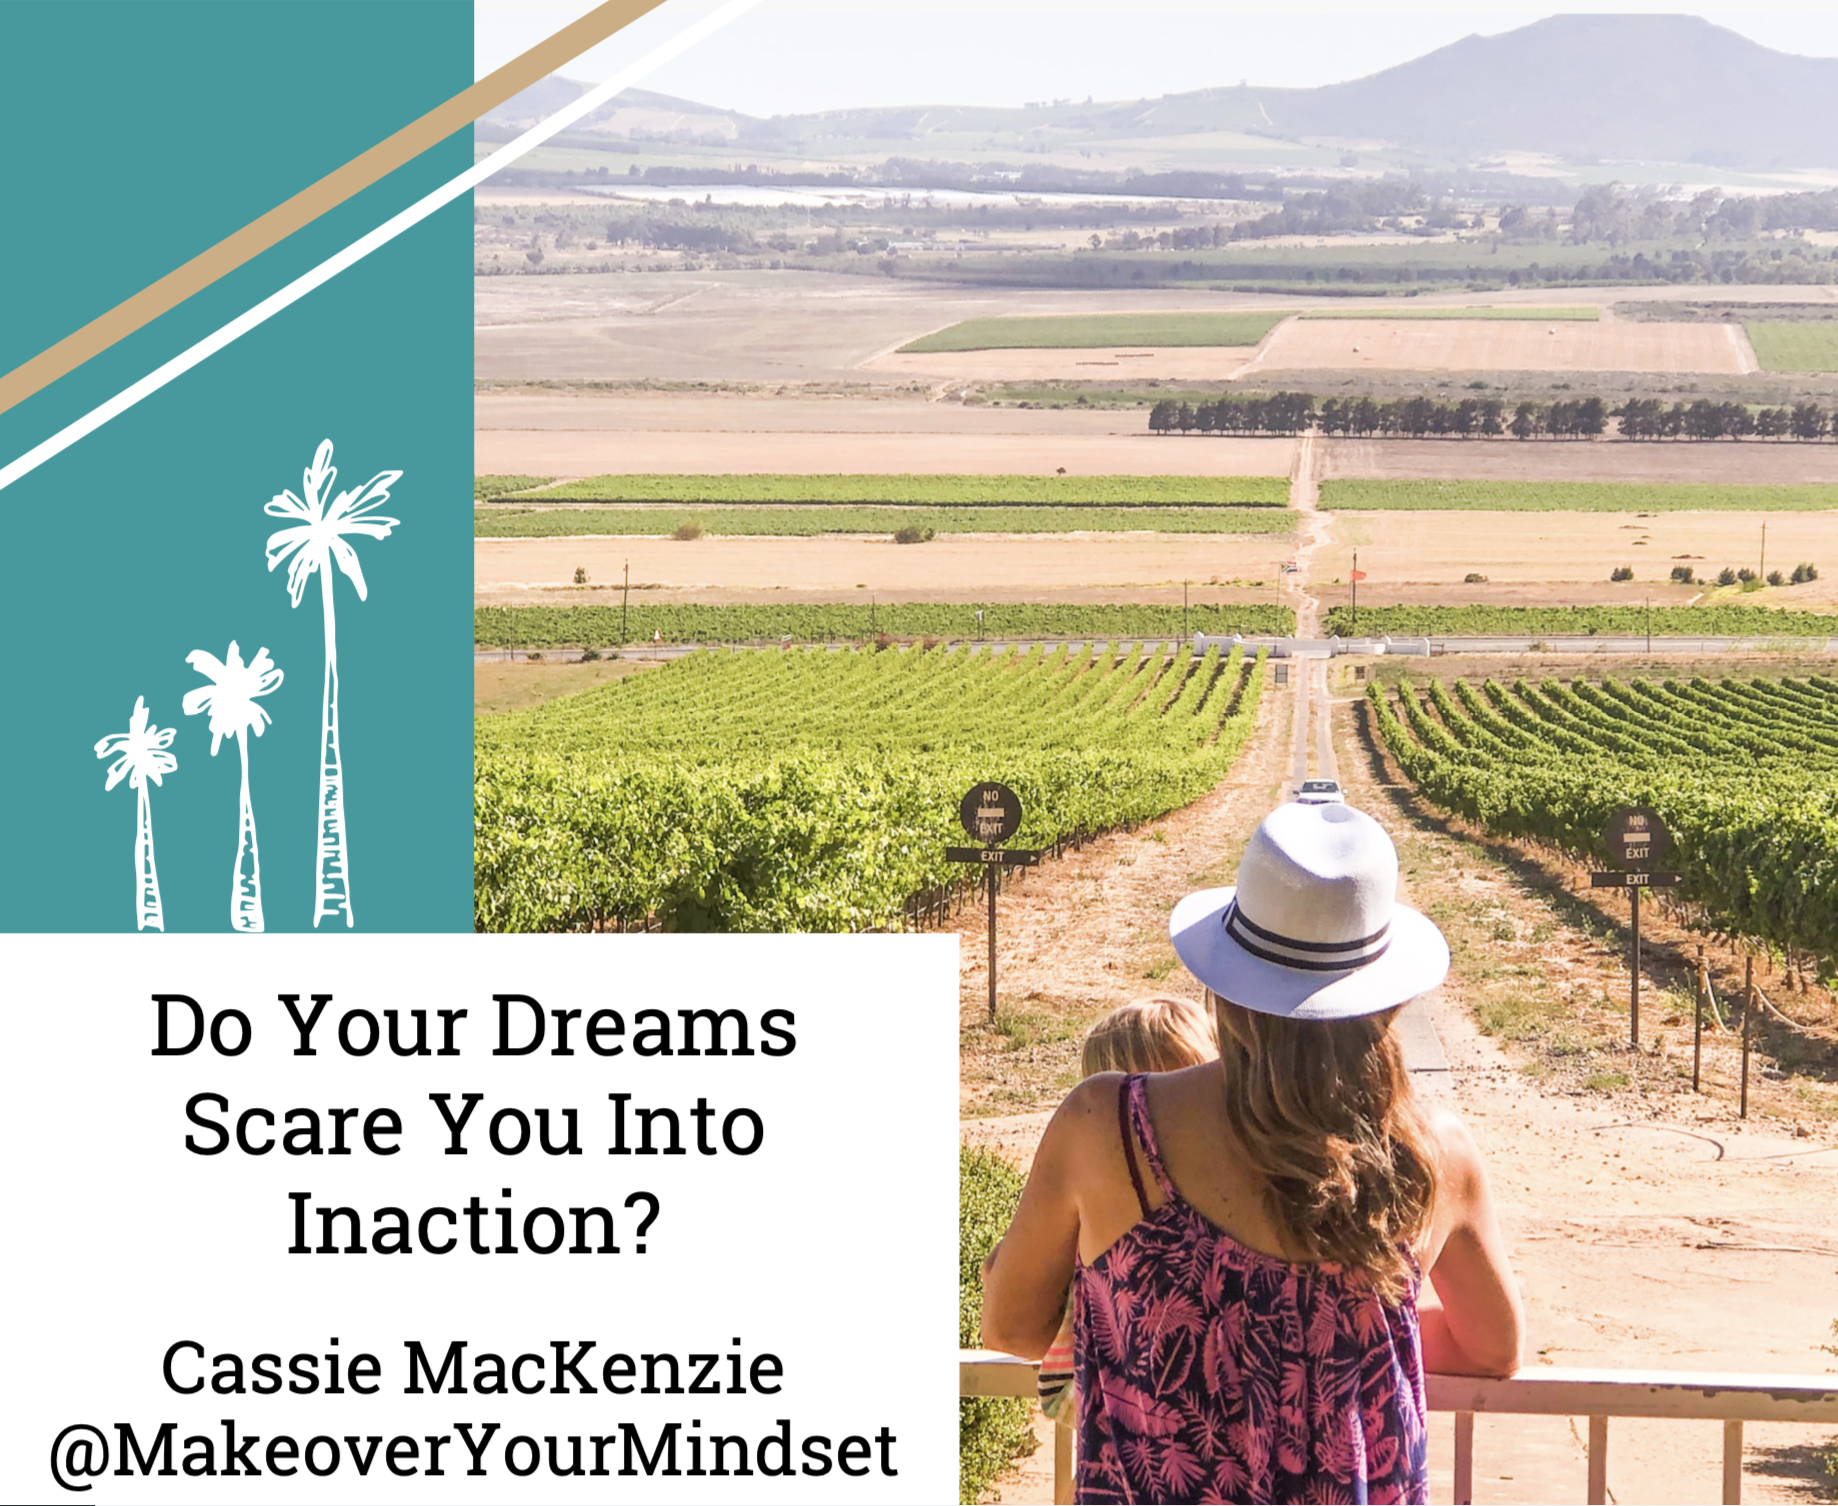 Do Your Dreams Scare You Into Inaction? by Cassie MacKenzie